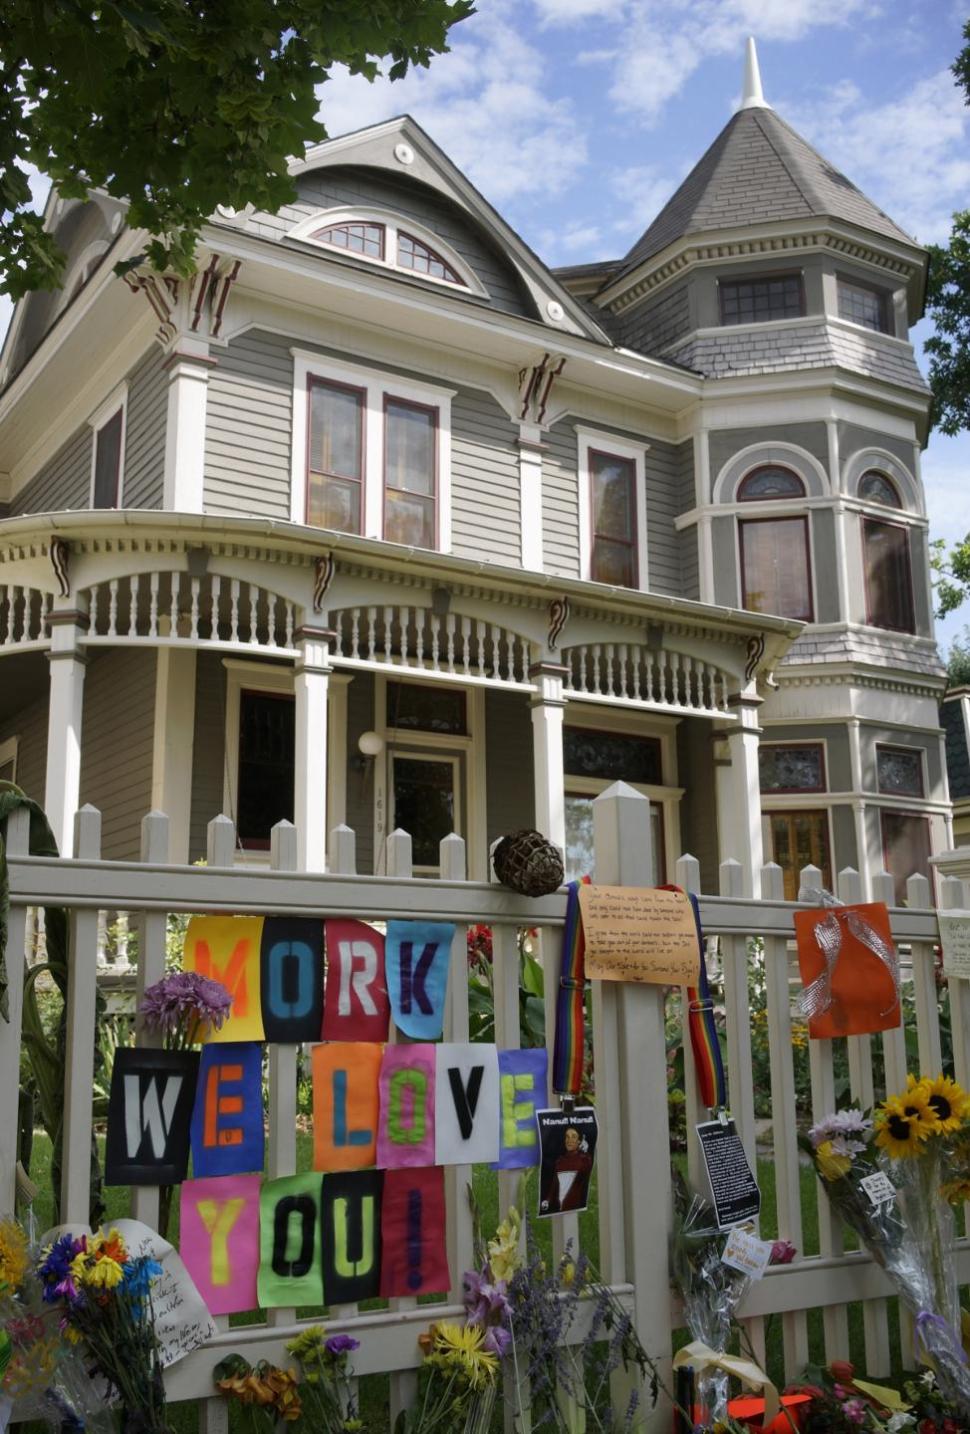 The house used in actor Robin Williams' breakout hit TV show 'Mork and Mindy' has an impromptu memorial set up outside in Boulder, Colorado.